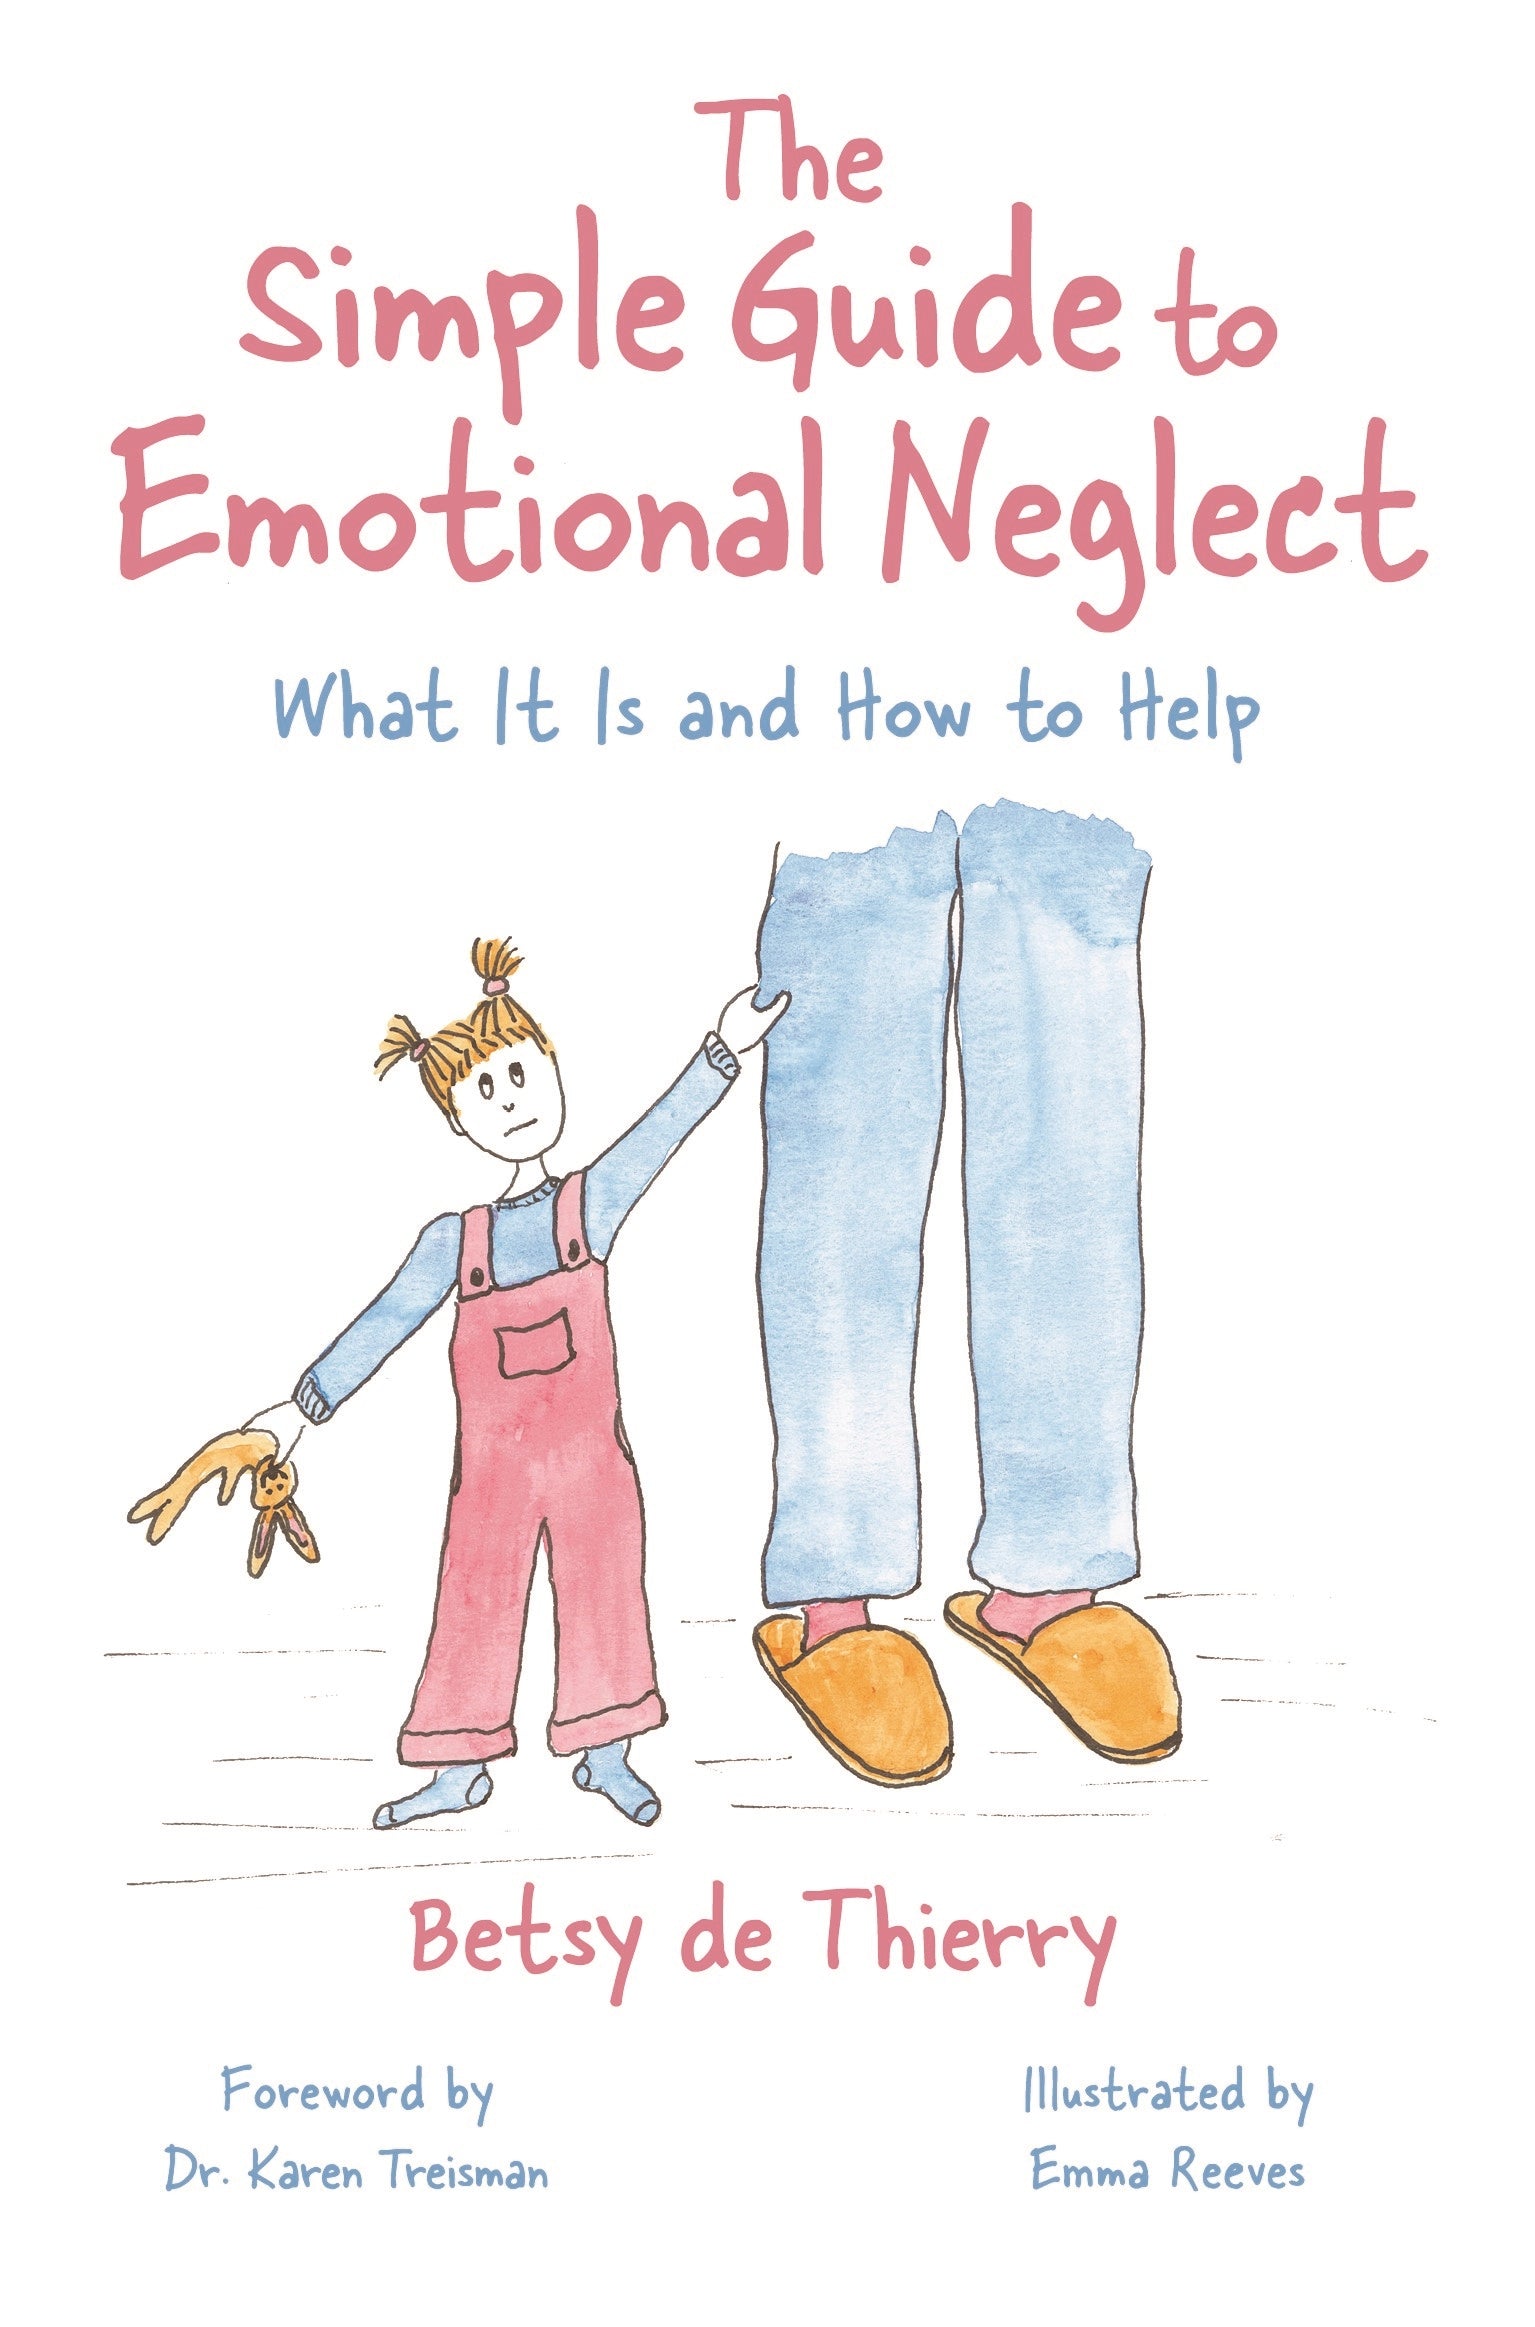 The Simple Guide to Emotional Neglect by Karen Treisman, Emma Reeves, Betsy de Thierry